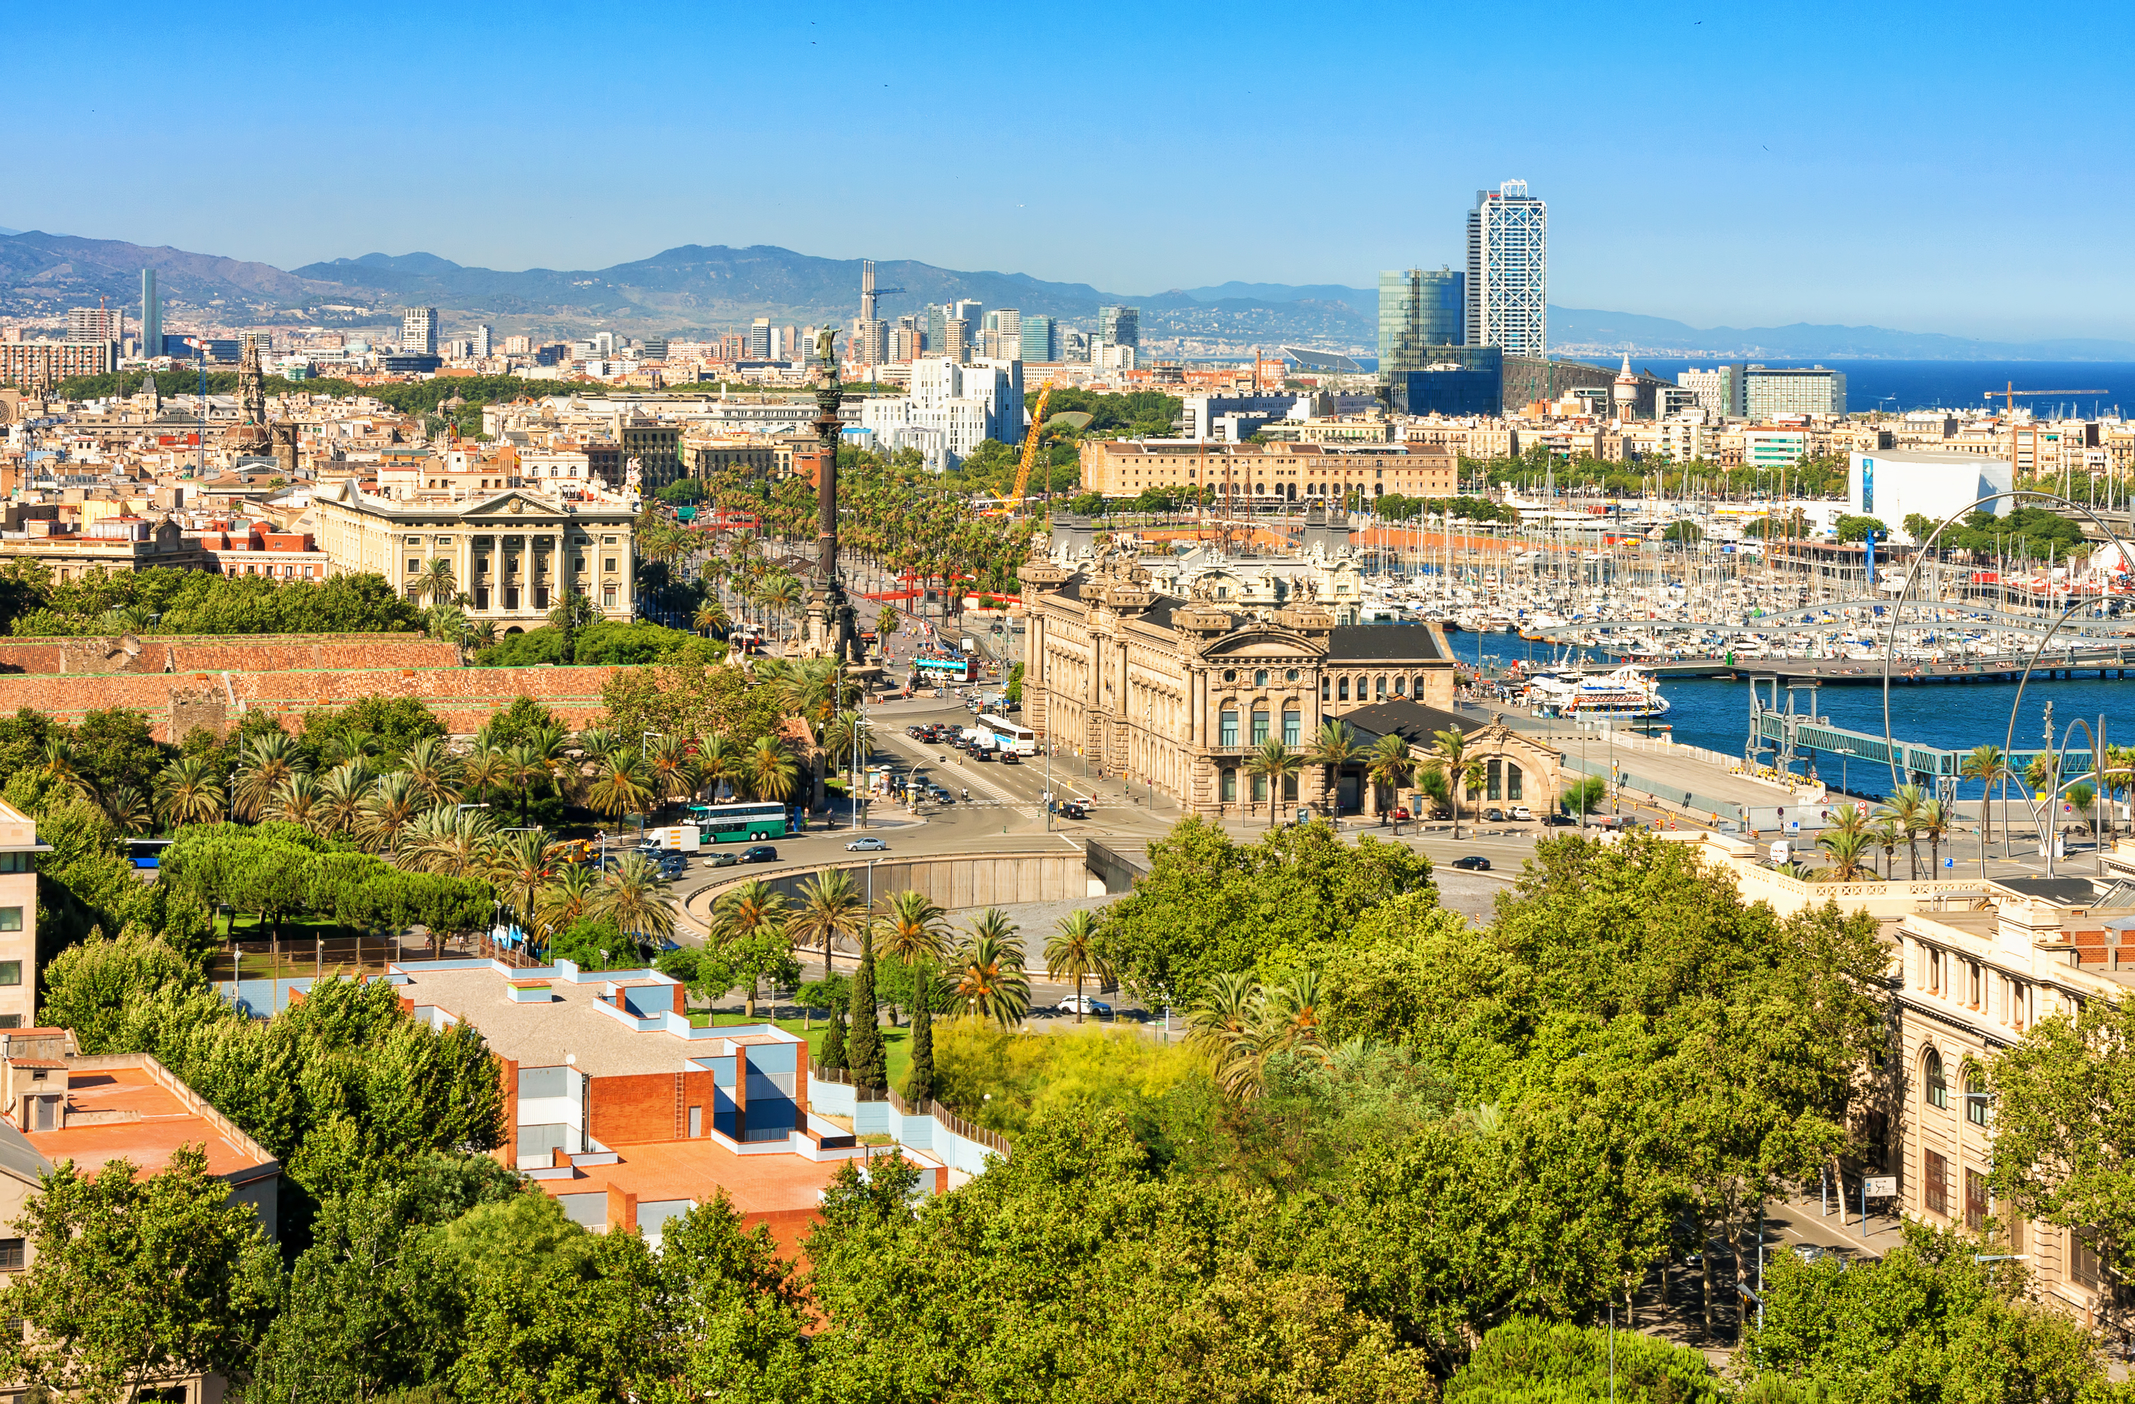 8-night Madrid, Seville & Barcelona escape with airfare & hotels from $1,452